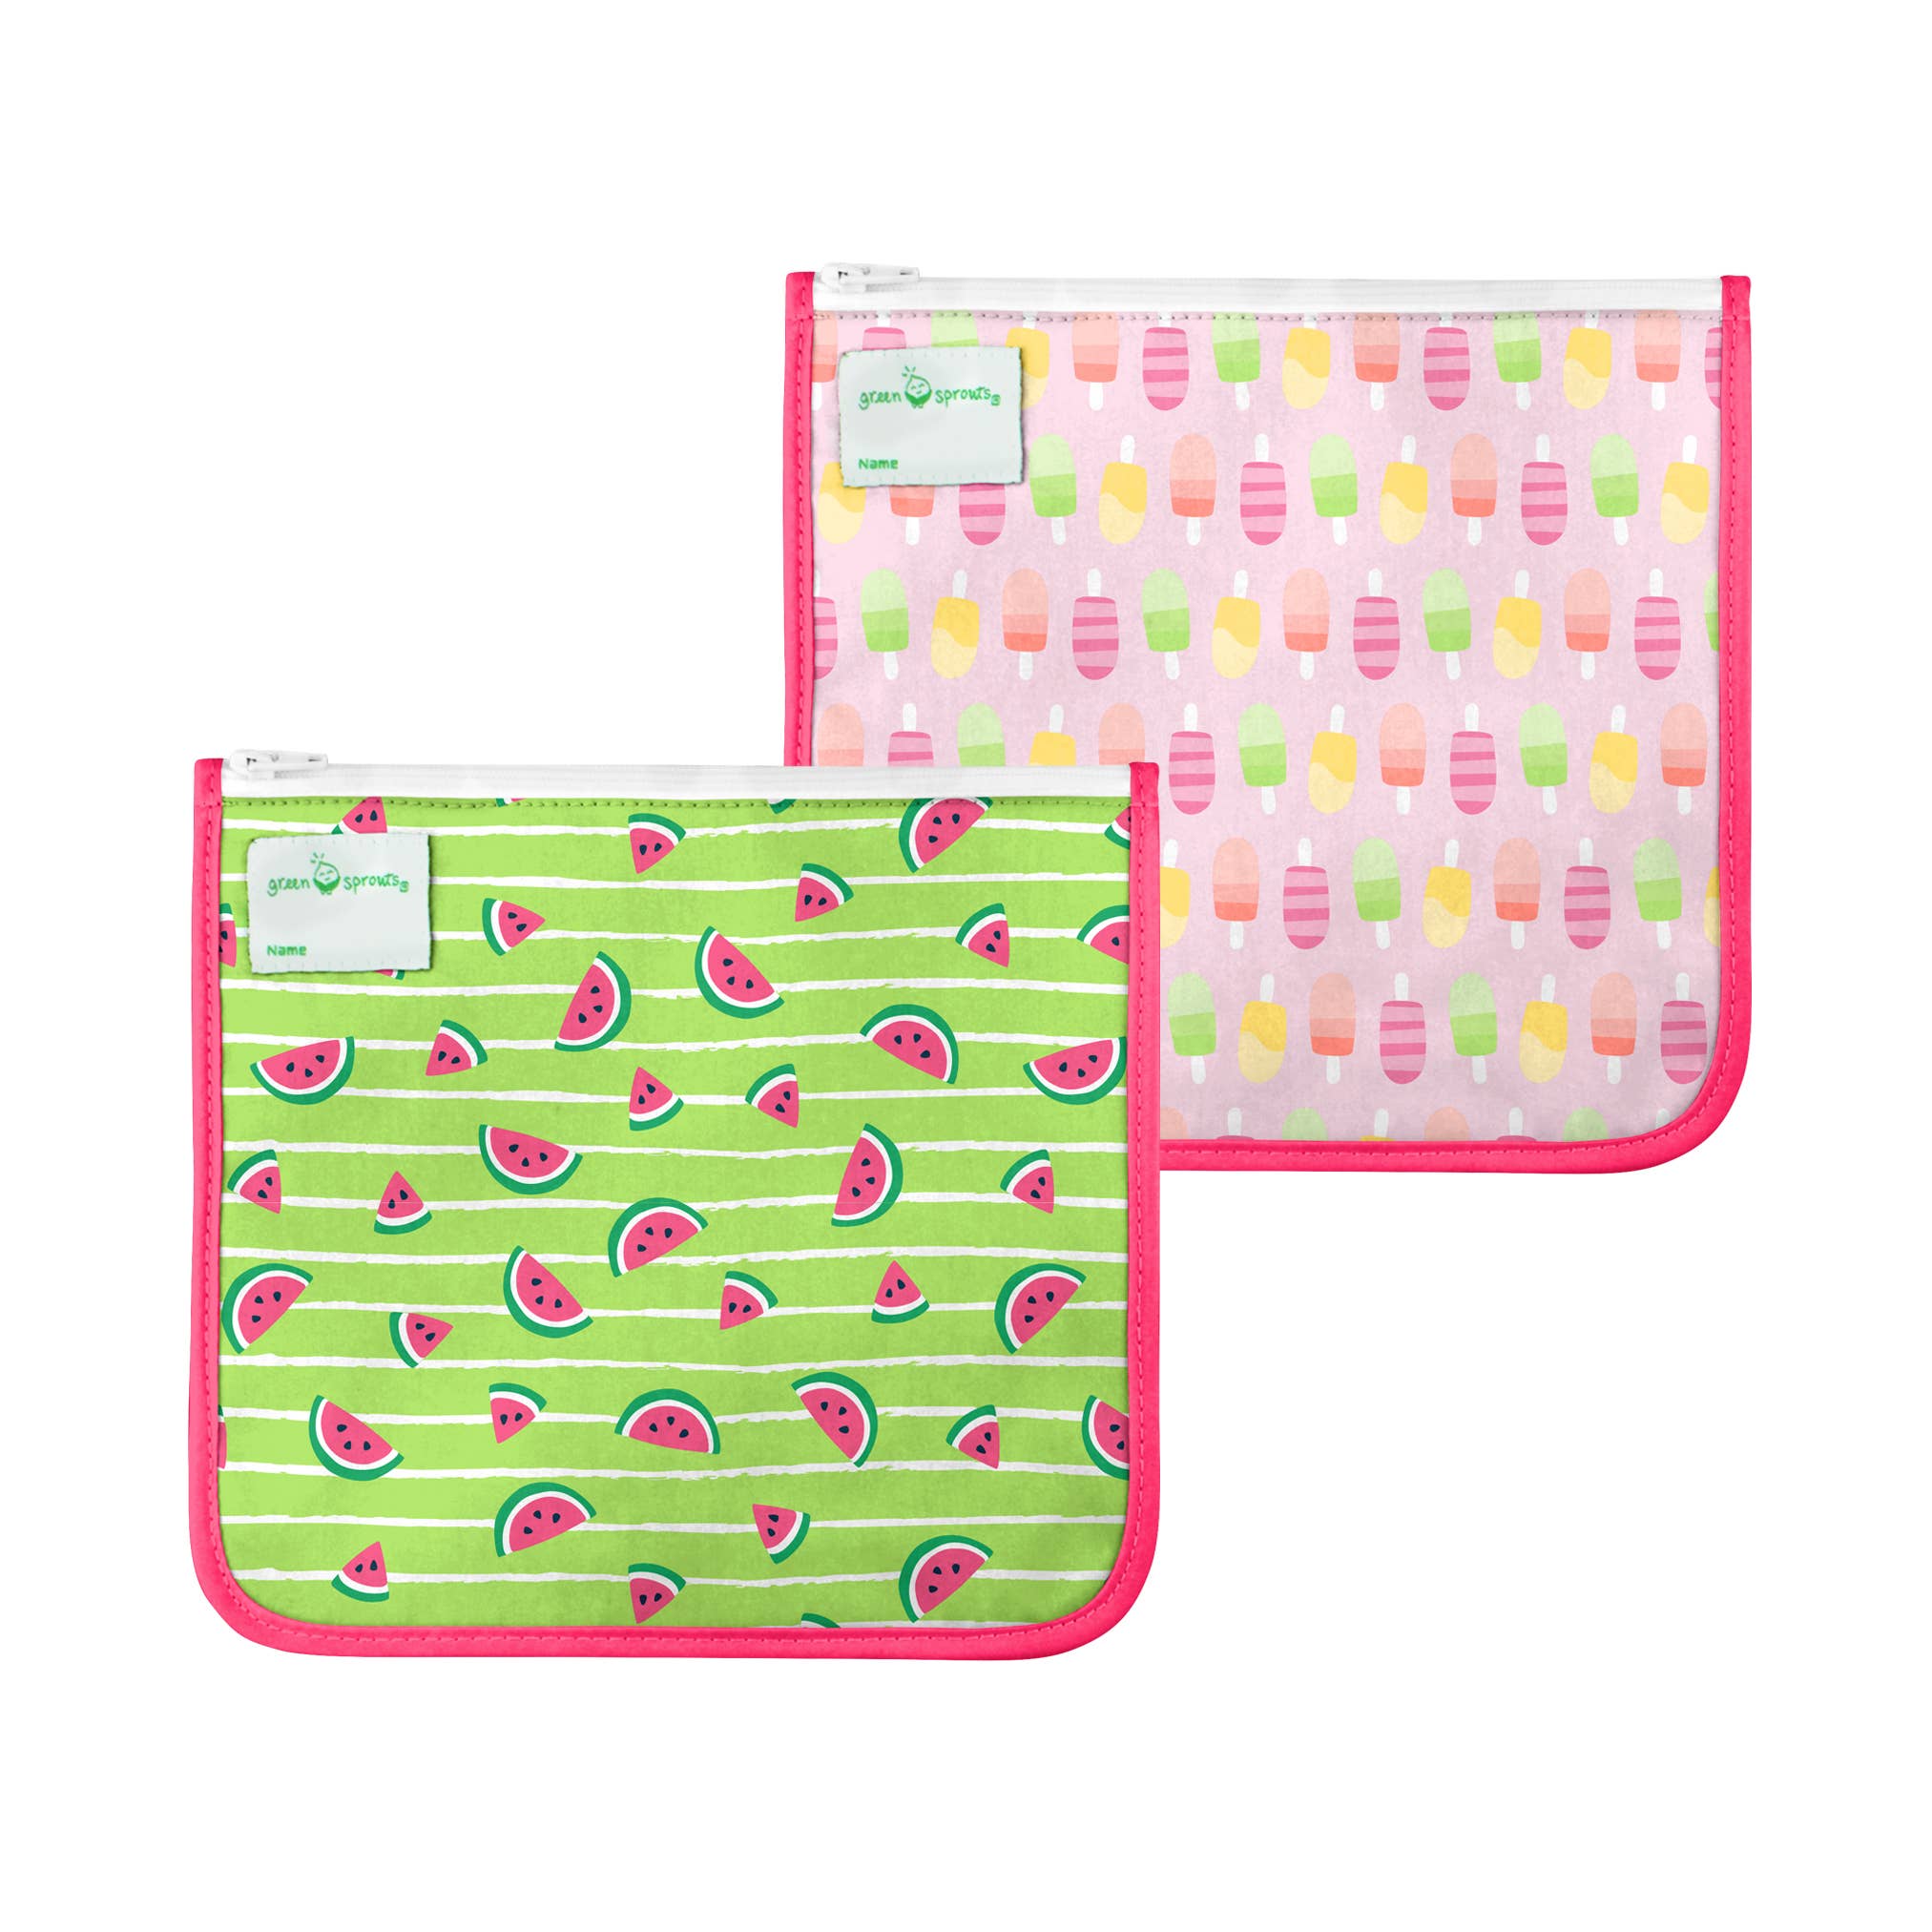 Reusable Insulated Sandwich Bags (2pk) Popsicles/Watermelons